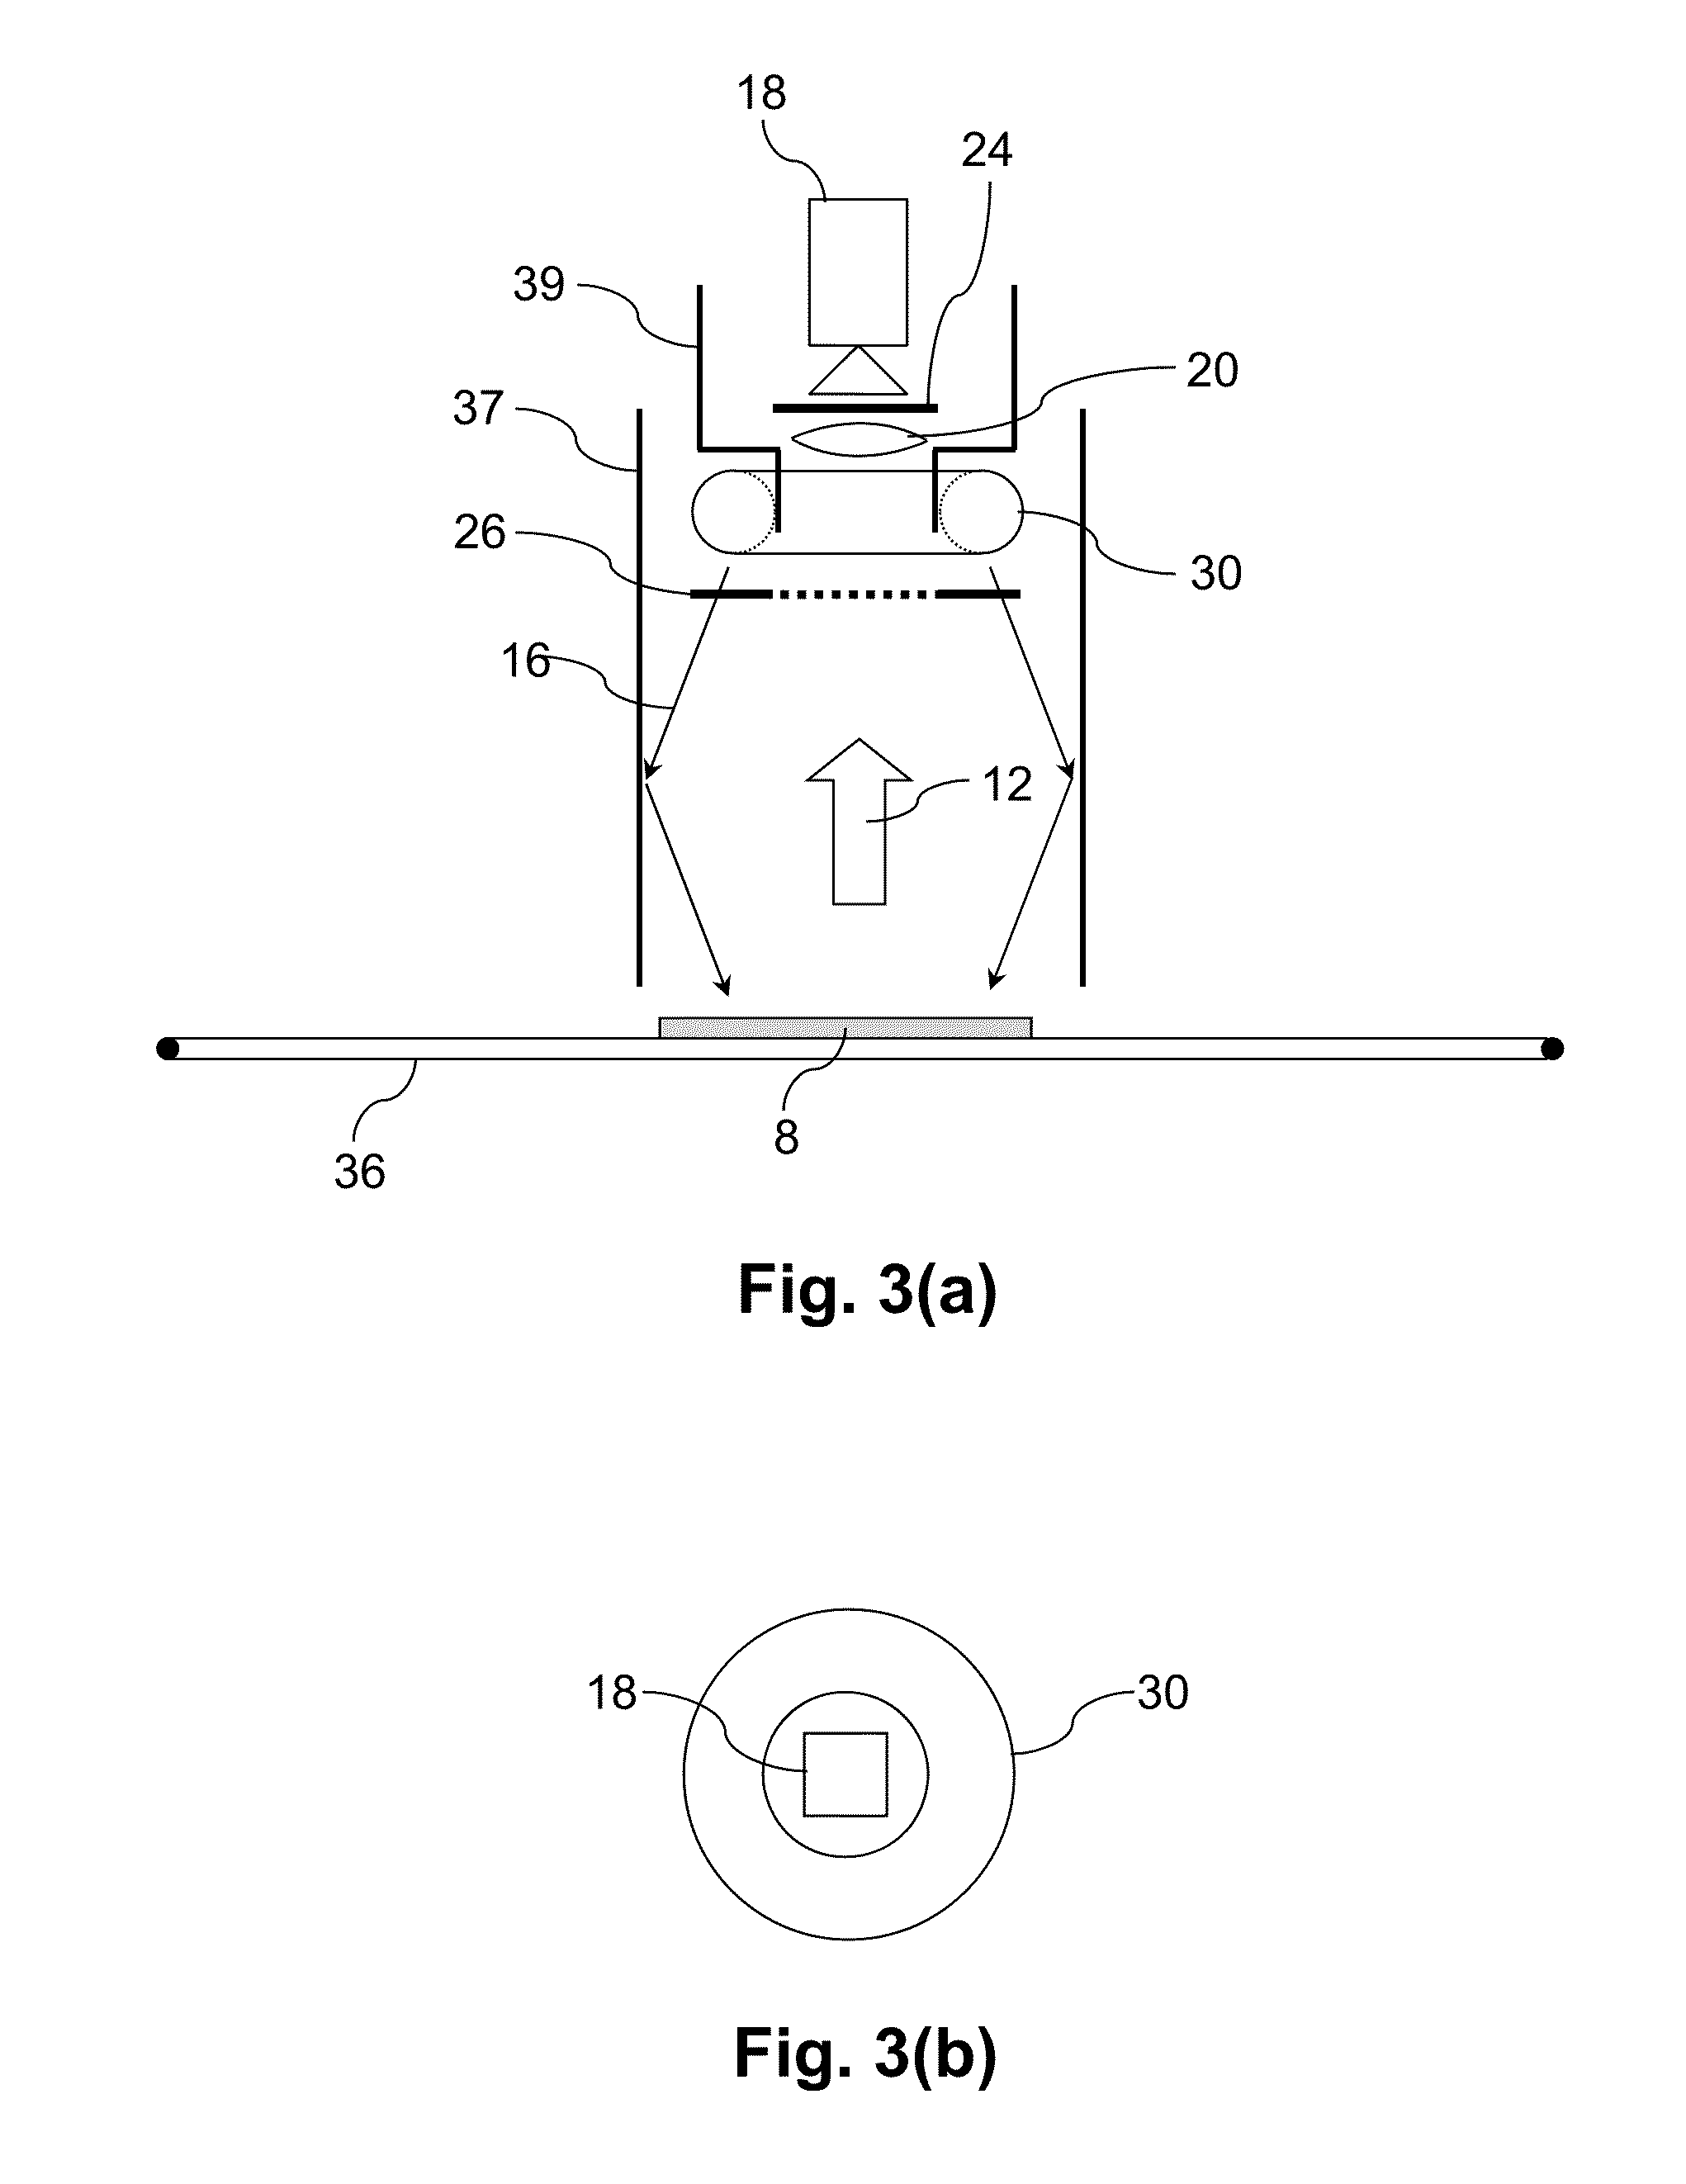 Illumination Systems and Methods for Photoluminescence Imaging of Photovoltaic Cells and Wafers